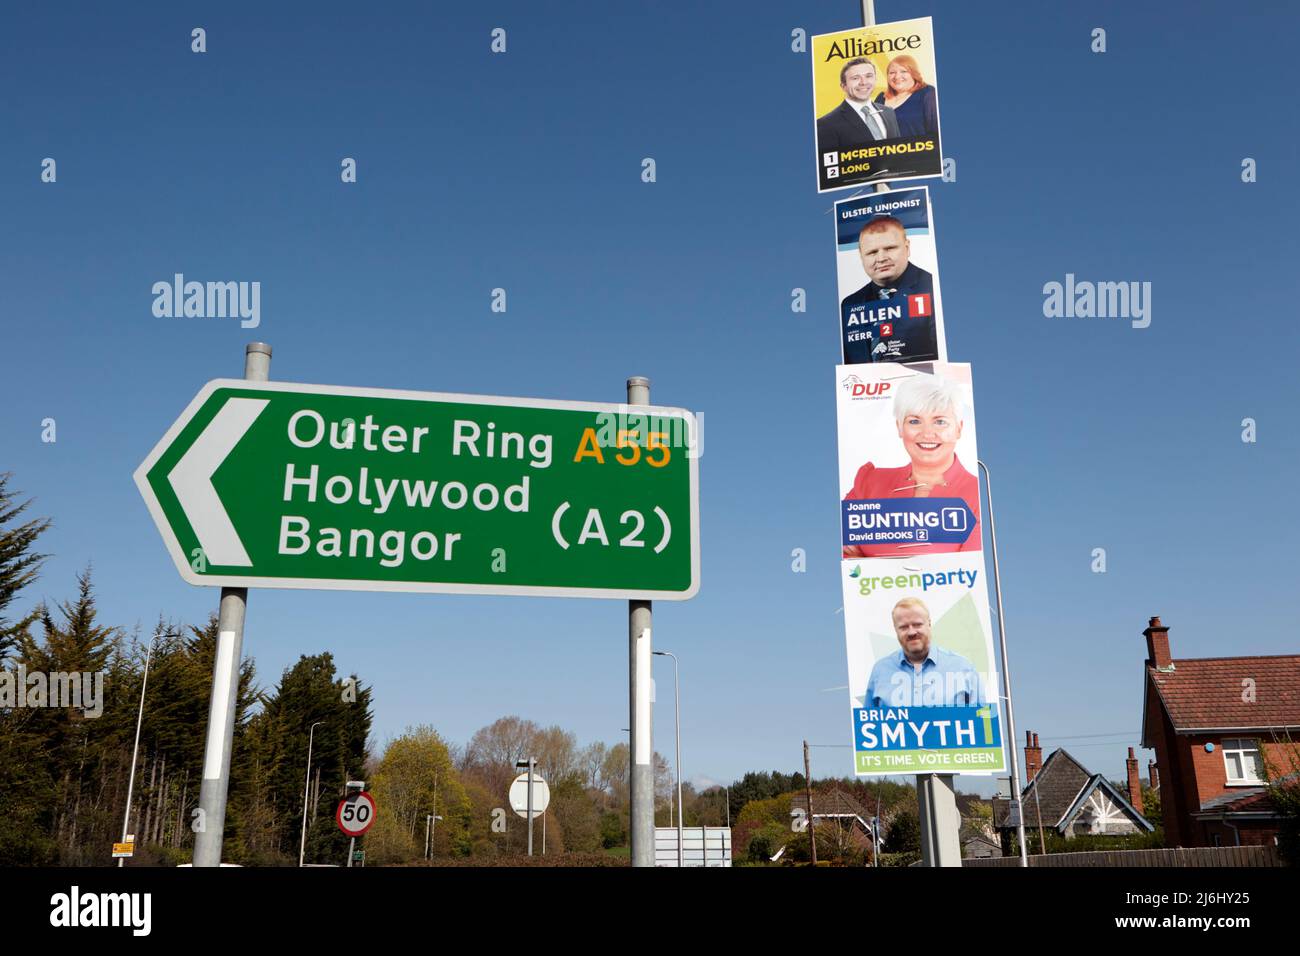 Alliance, Ulster Unionist,DUP and Green Party election posters in the outer ring/stormont area of East Belfast, Northern Ireland, 20th April 2022. Stock Photo